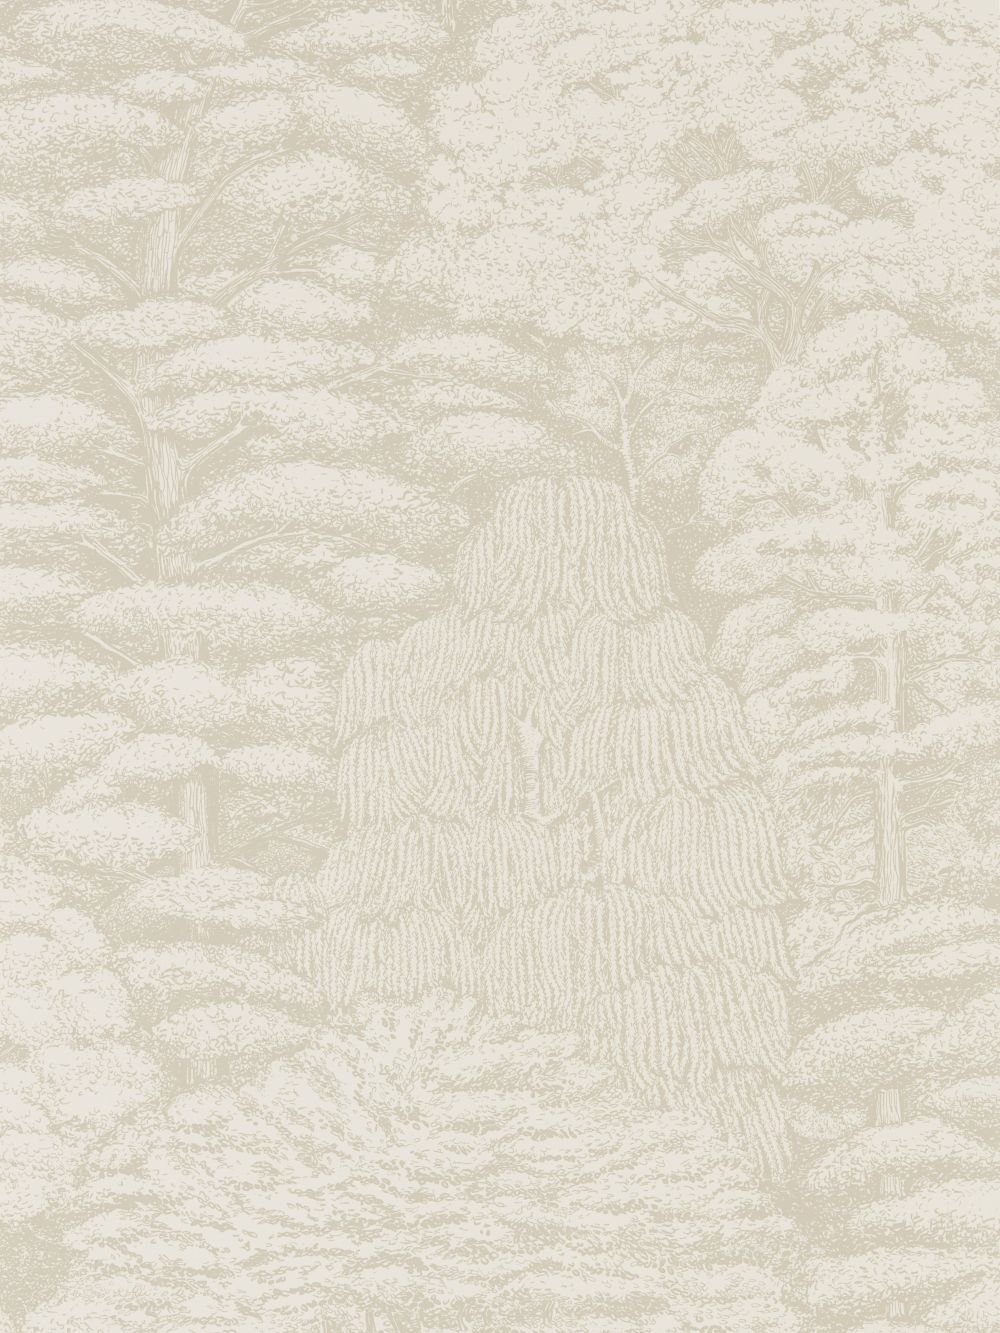 Woodland Toile Wallpaper - Ivory and Neutral - by Sanderson